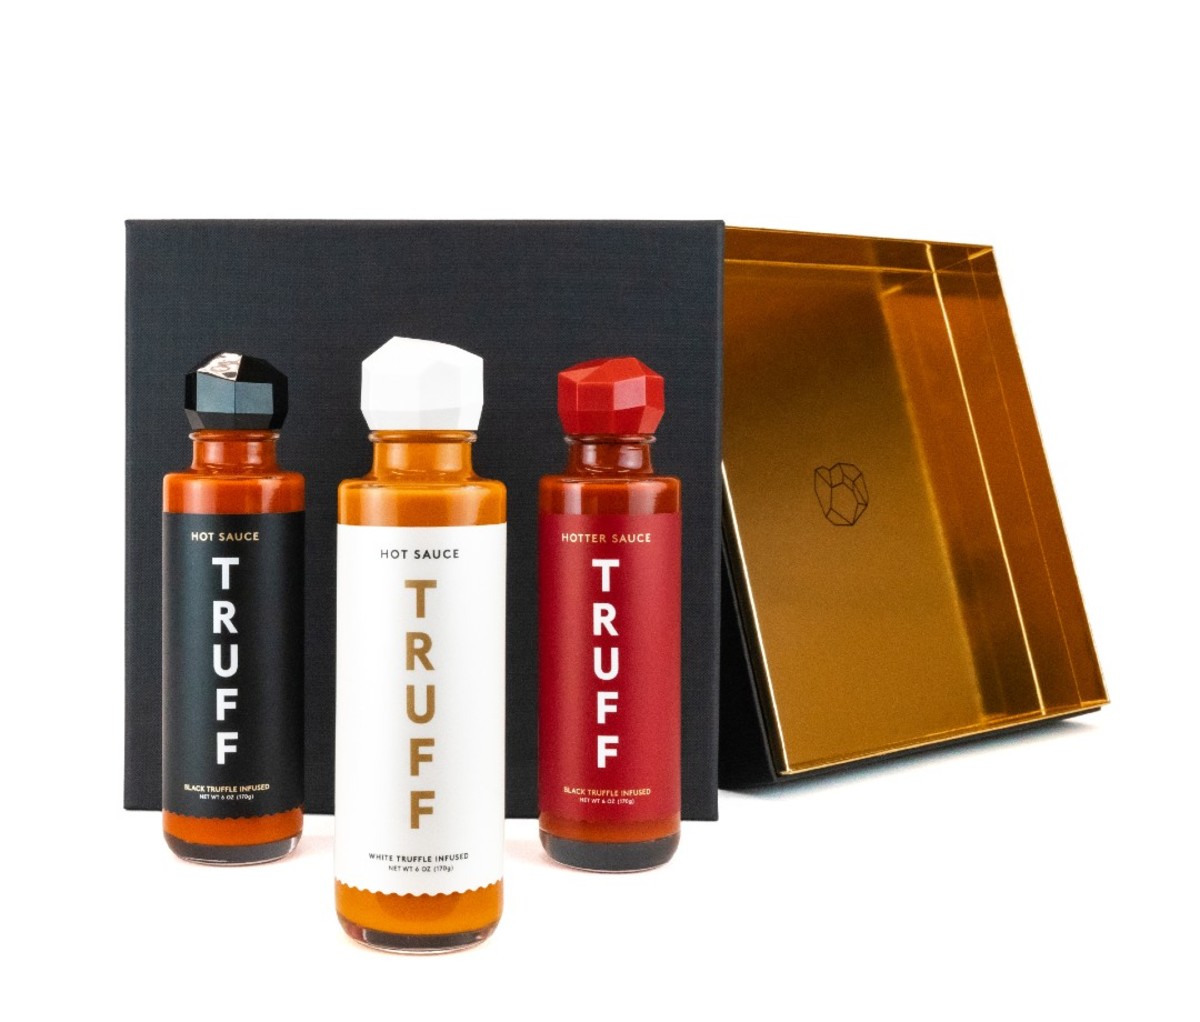 TRUFF Hot Sauce variety pack with packaging